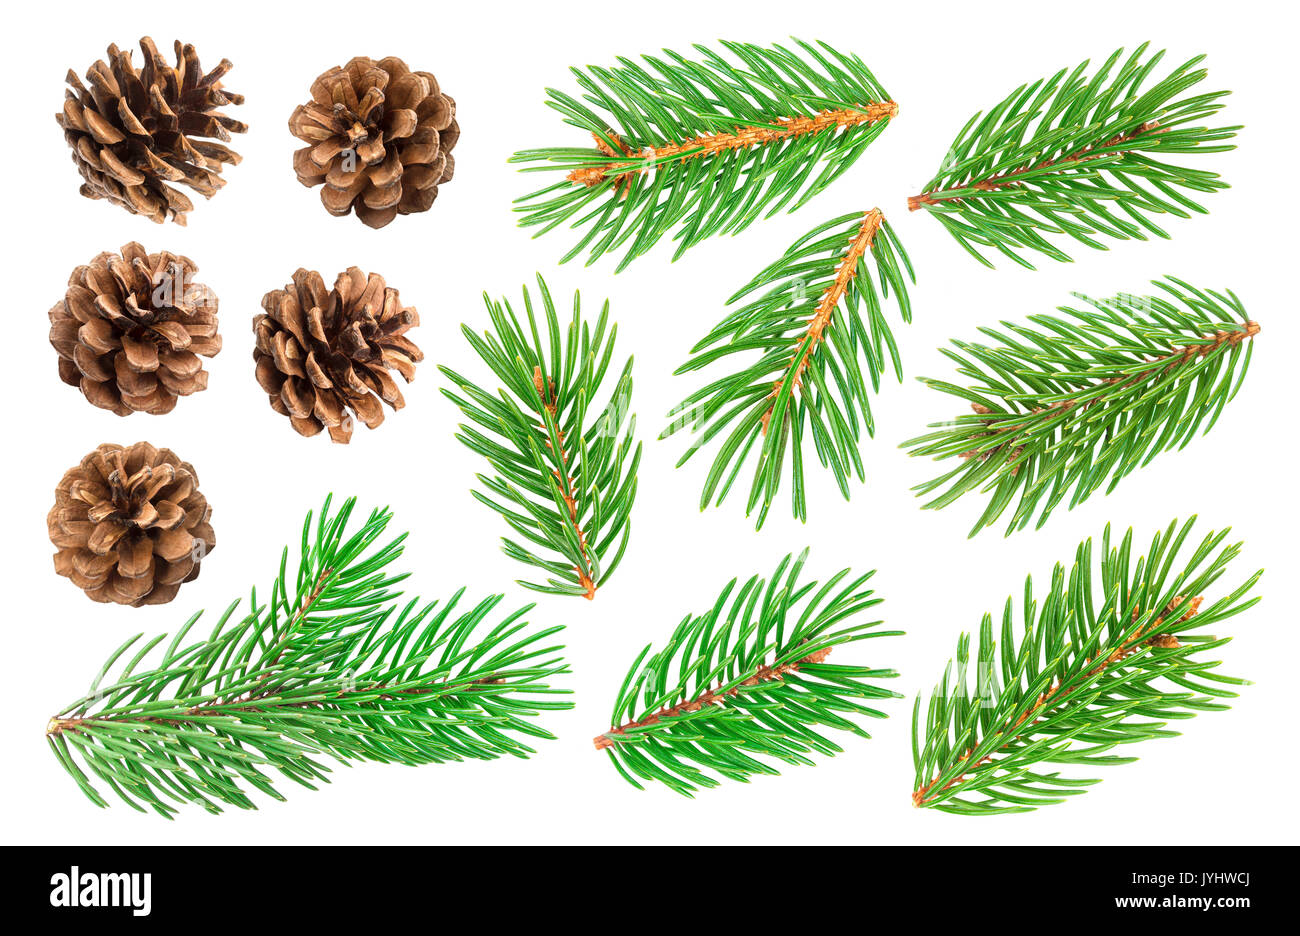 Fir tree branch and pine cones isolated on white background Stock Photo